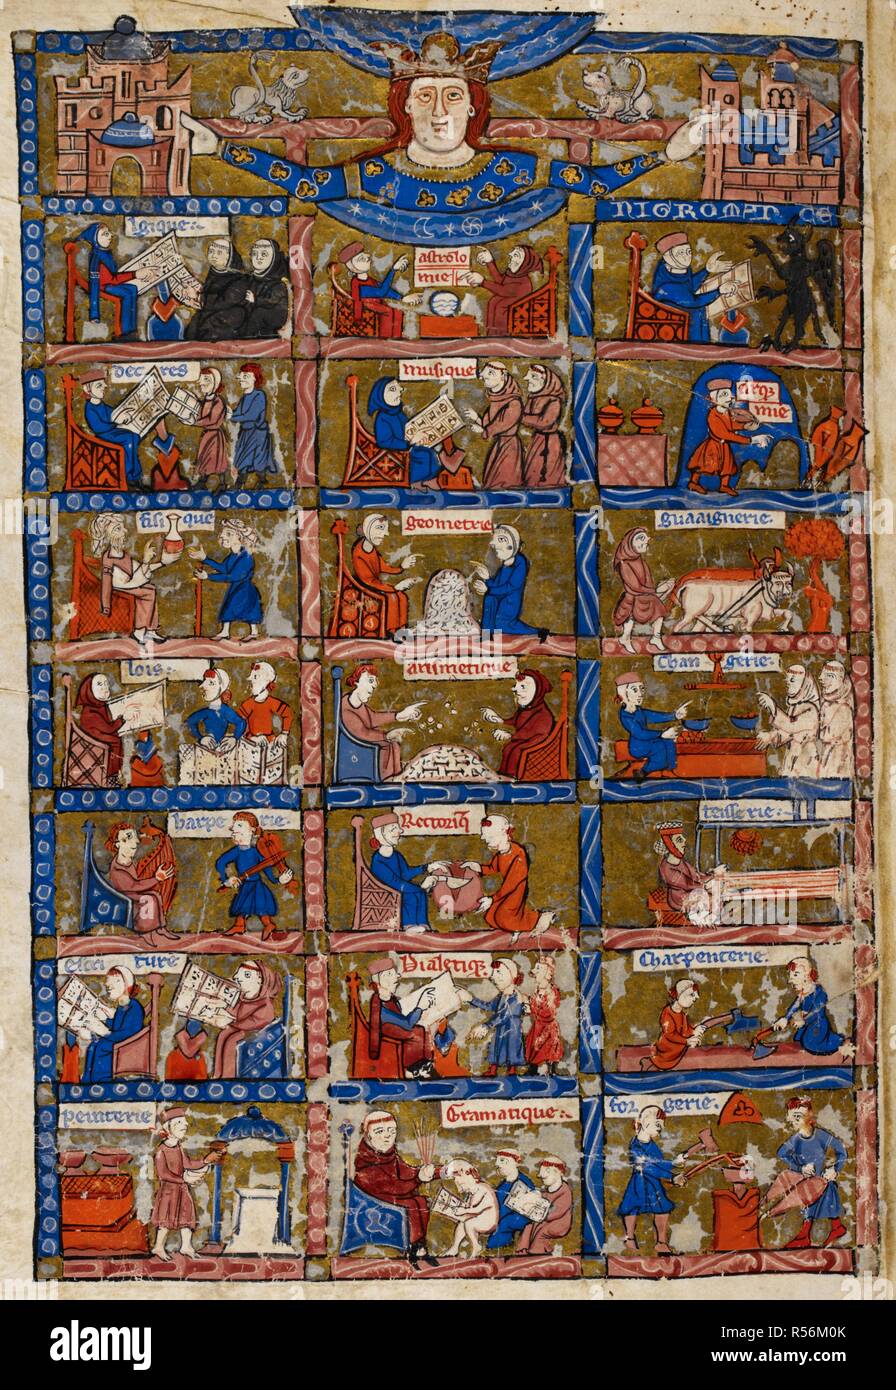 Twenty-one scenes representing the arts and sciences. Le livre du TrÃ©sor. Late 13th century. Source: Add. 30024, f.1v. Language: French. Author: LATINI, BRUNETTO. Stock Photo